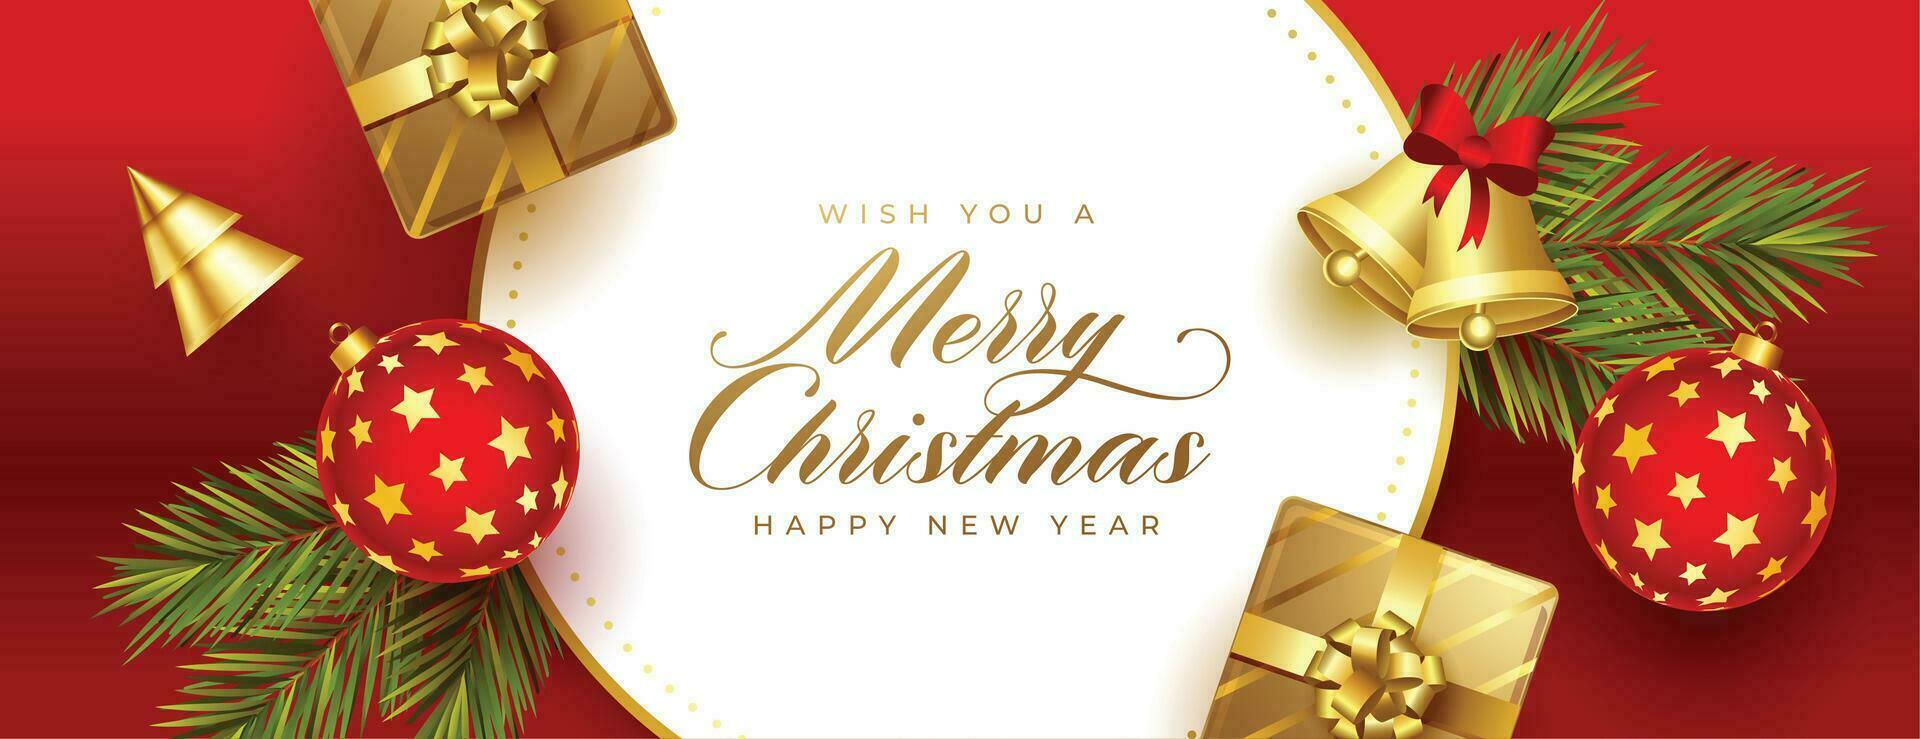 merry christmas greeting wallpaper with realistic xmas elements vector